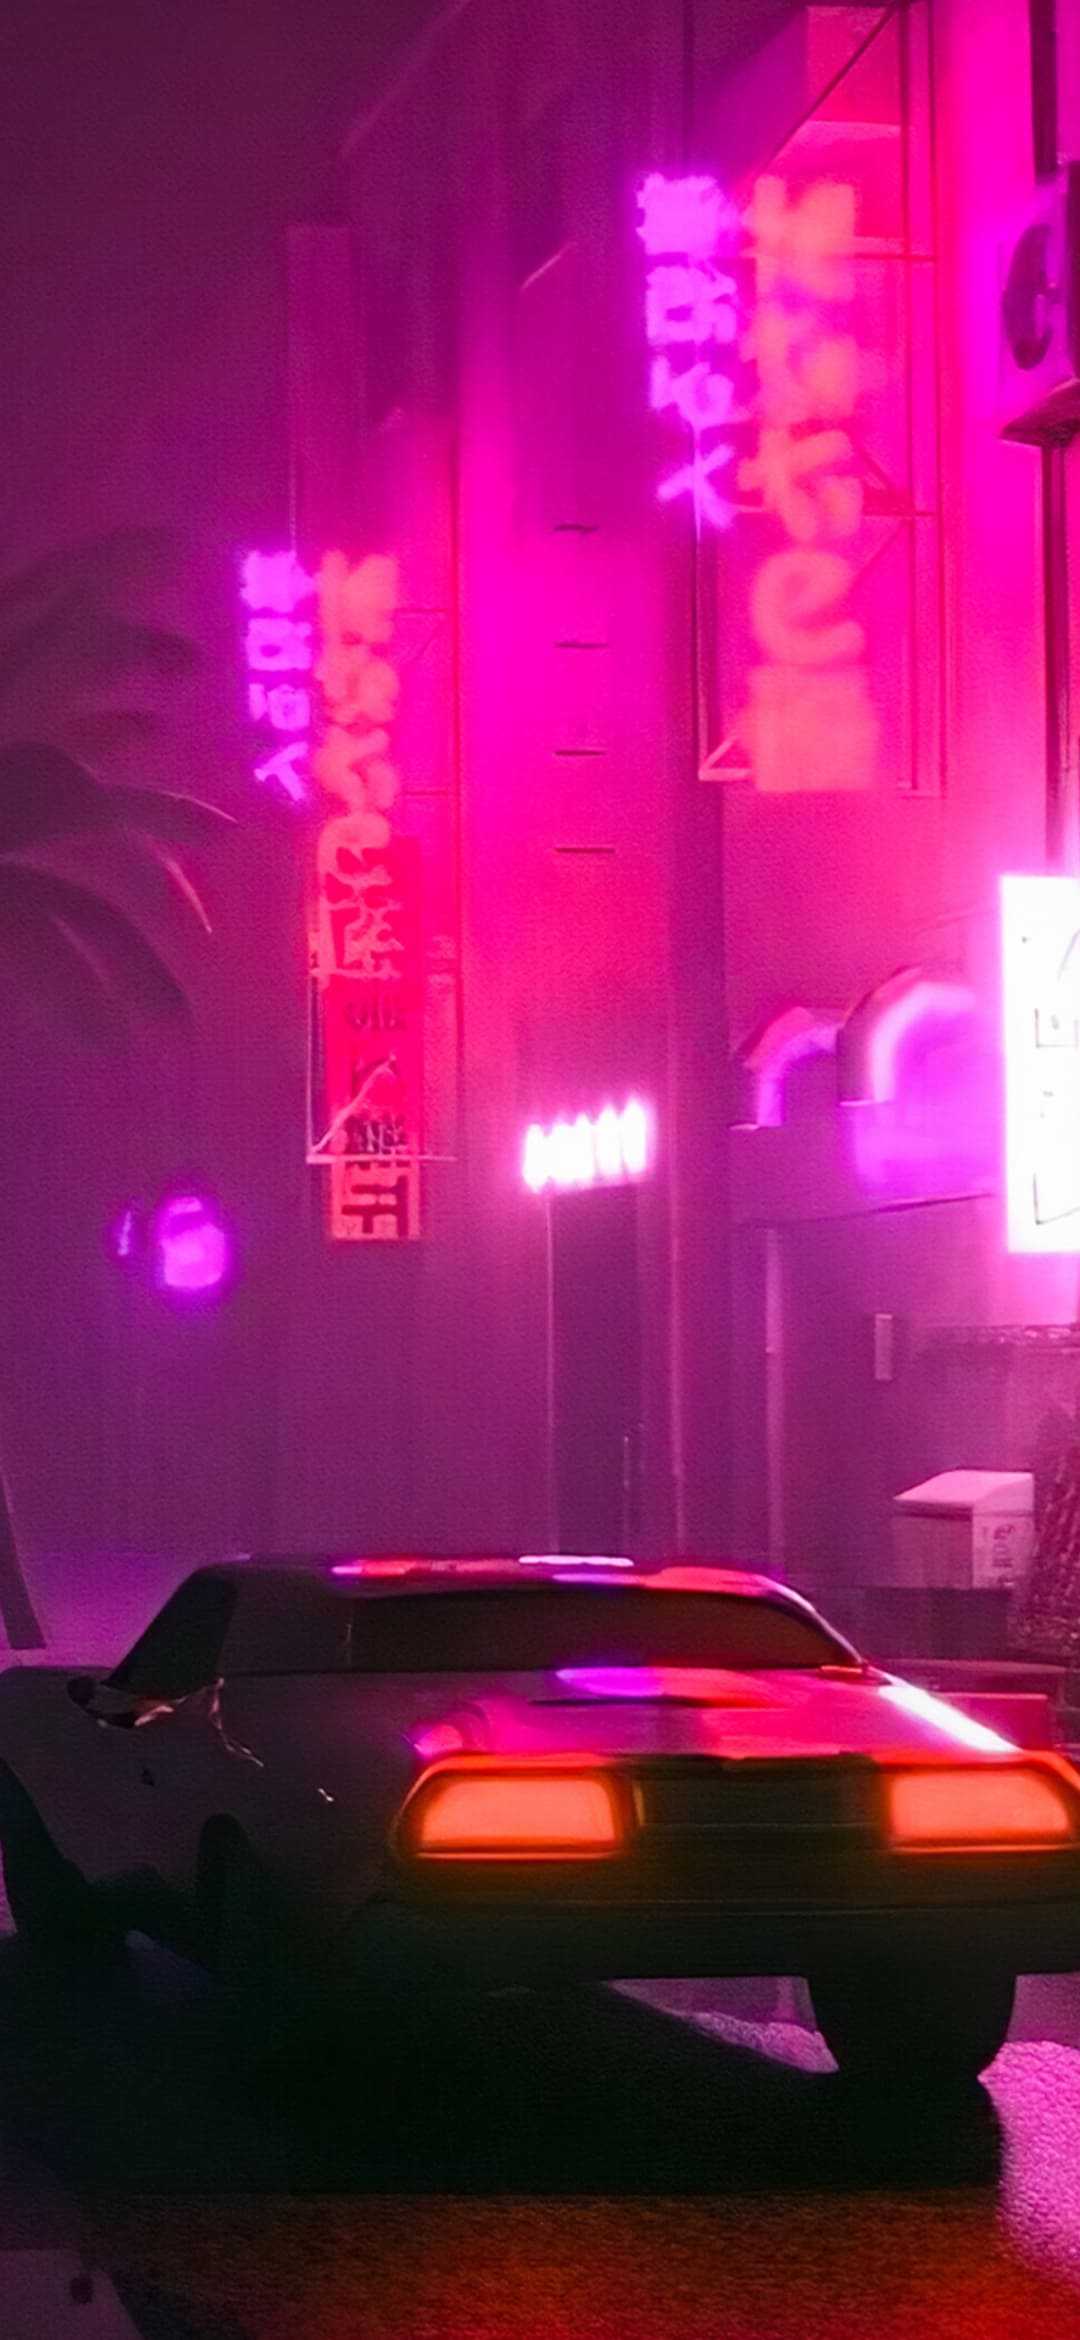 Synthwave IPhone Wallpaper